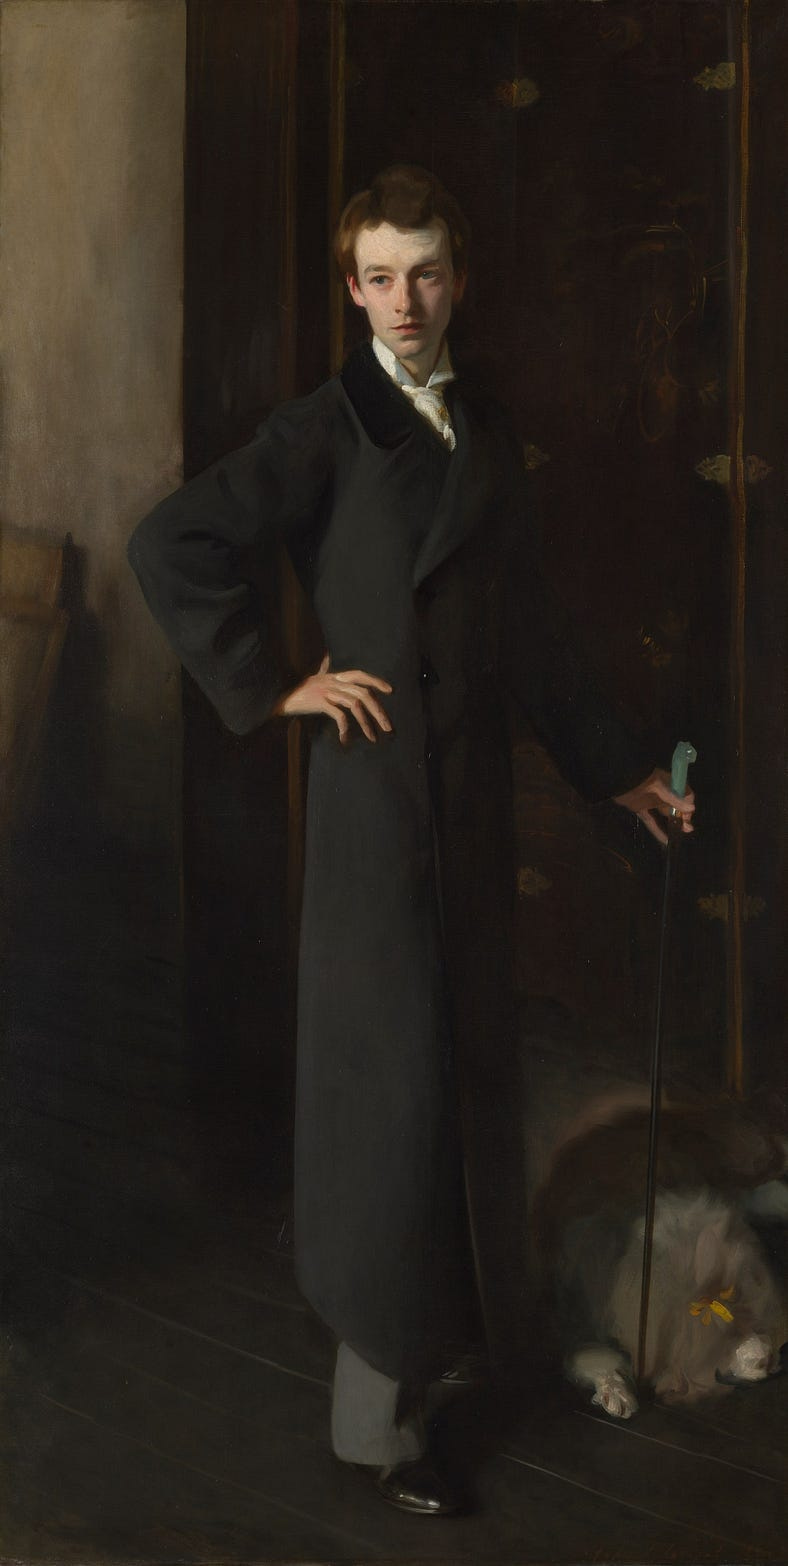 W. Graham Robertson (1894), with hints of dandyism creeping through — such as jade handled cane and comically fluffy dog nearby.